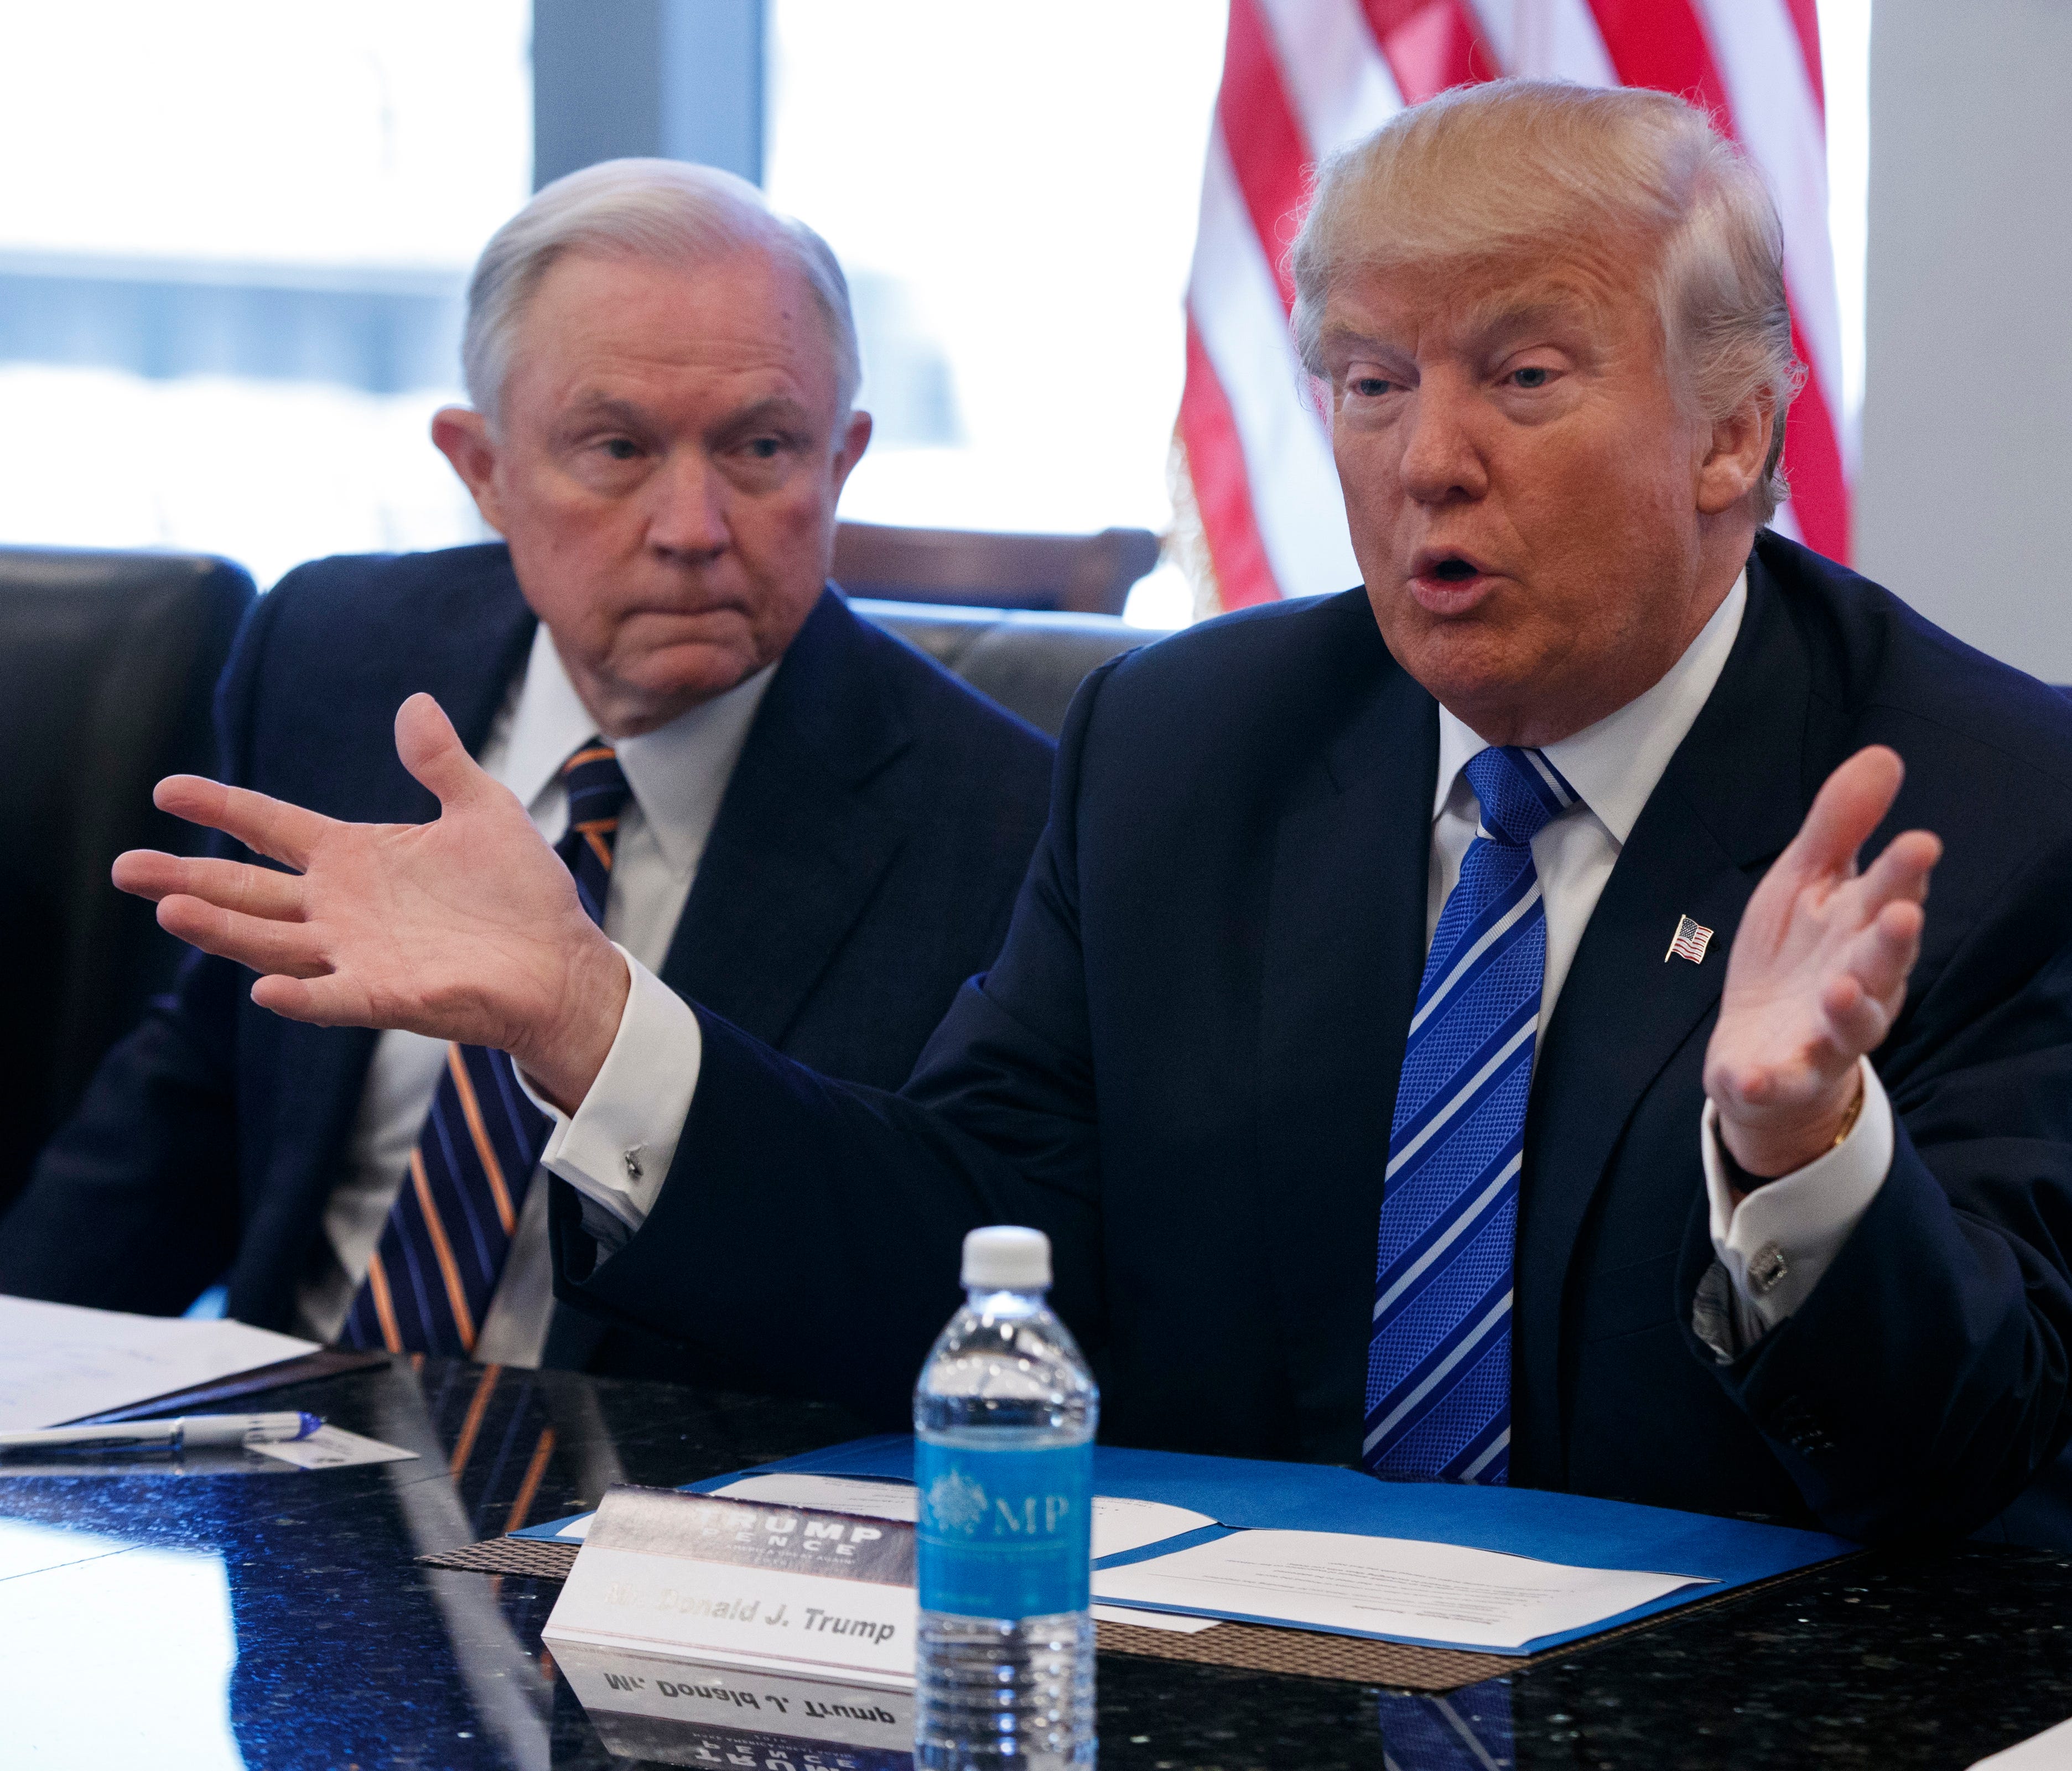 Sen. Jeff Sessions, R-Ala., with President-elect Donald Trump during a meeting at Trump Tower